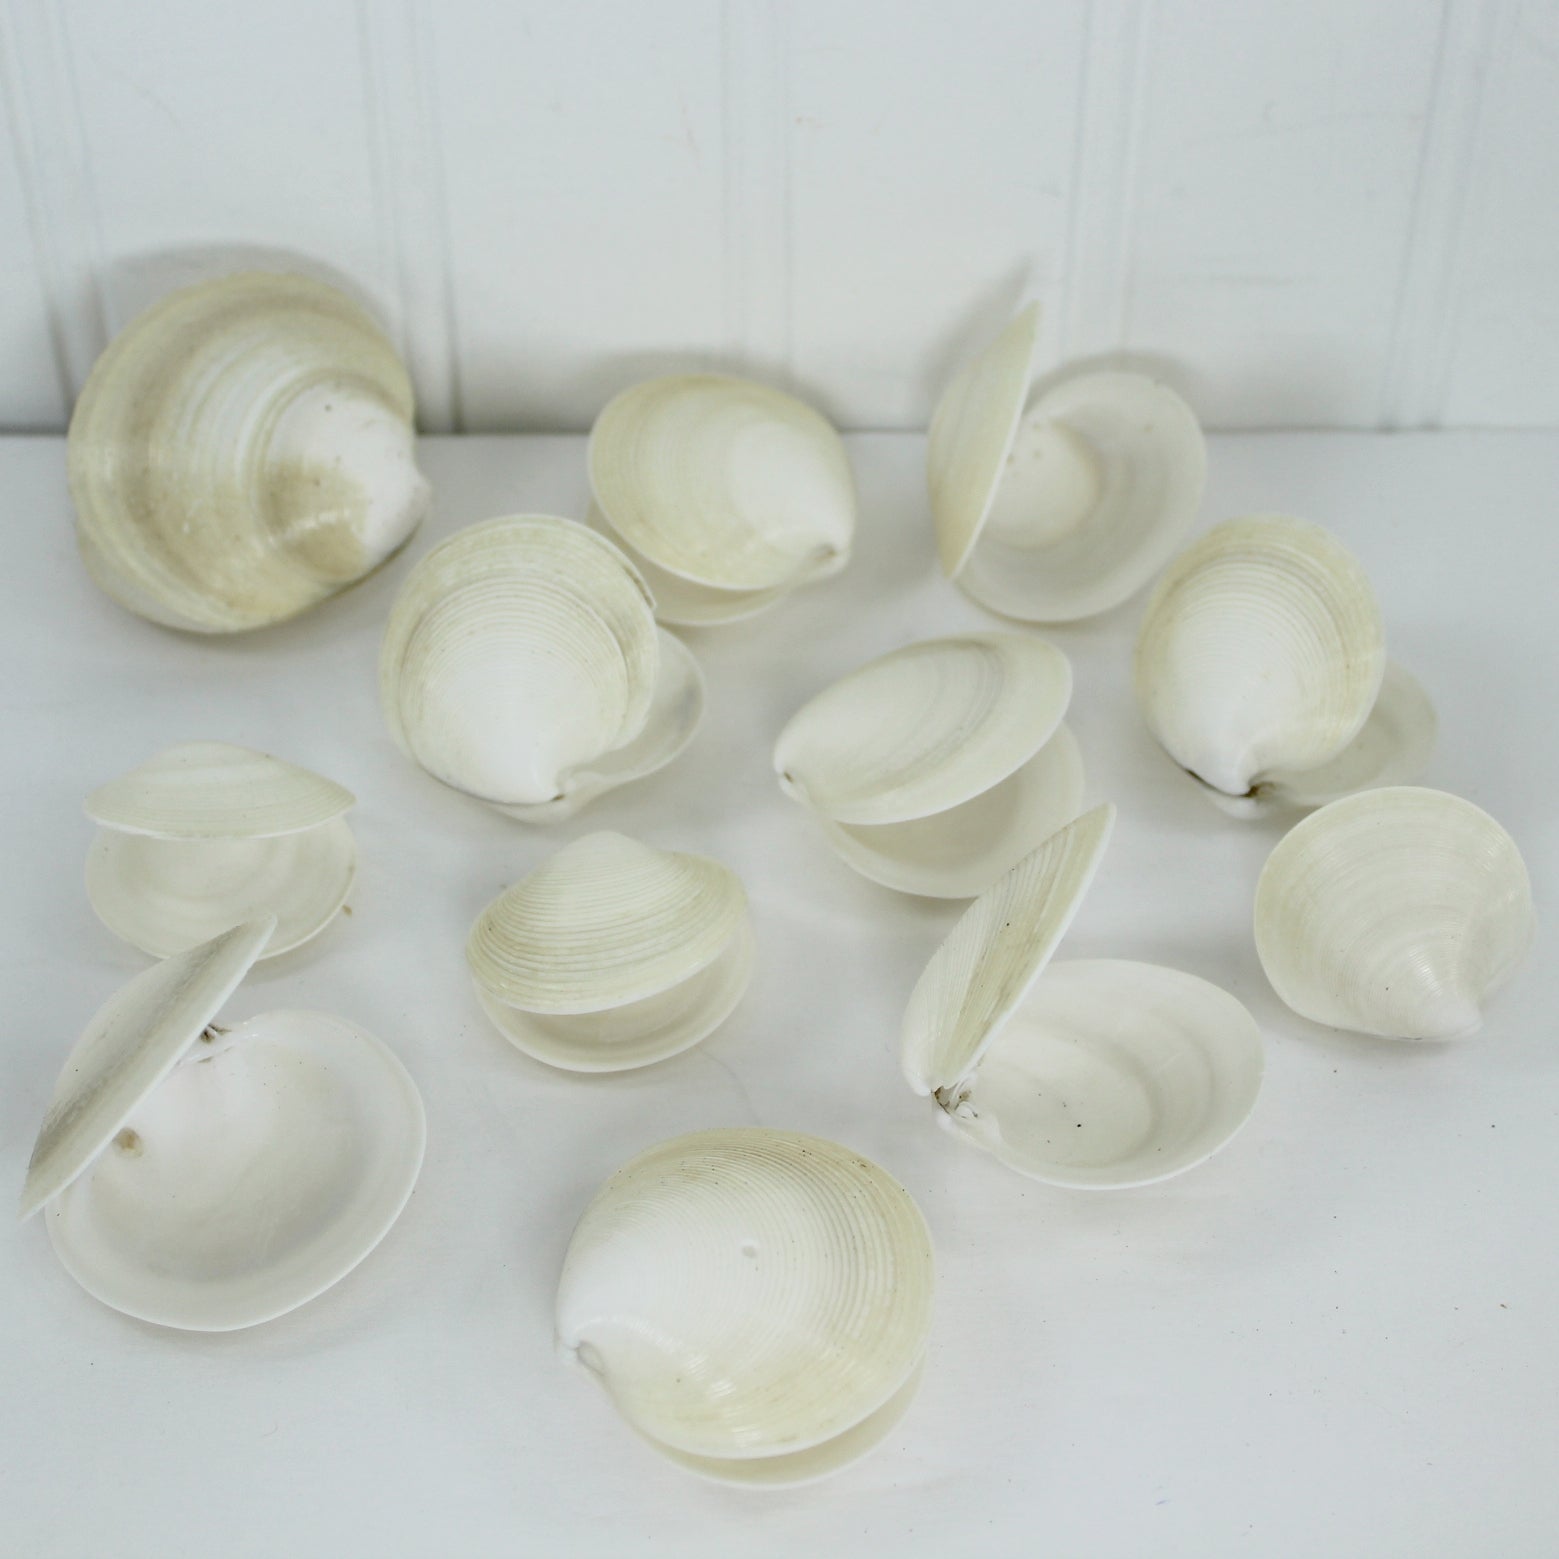 clam shells for sale 